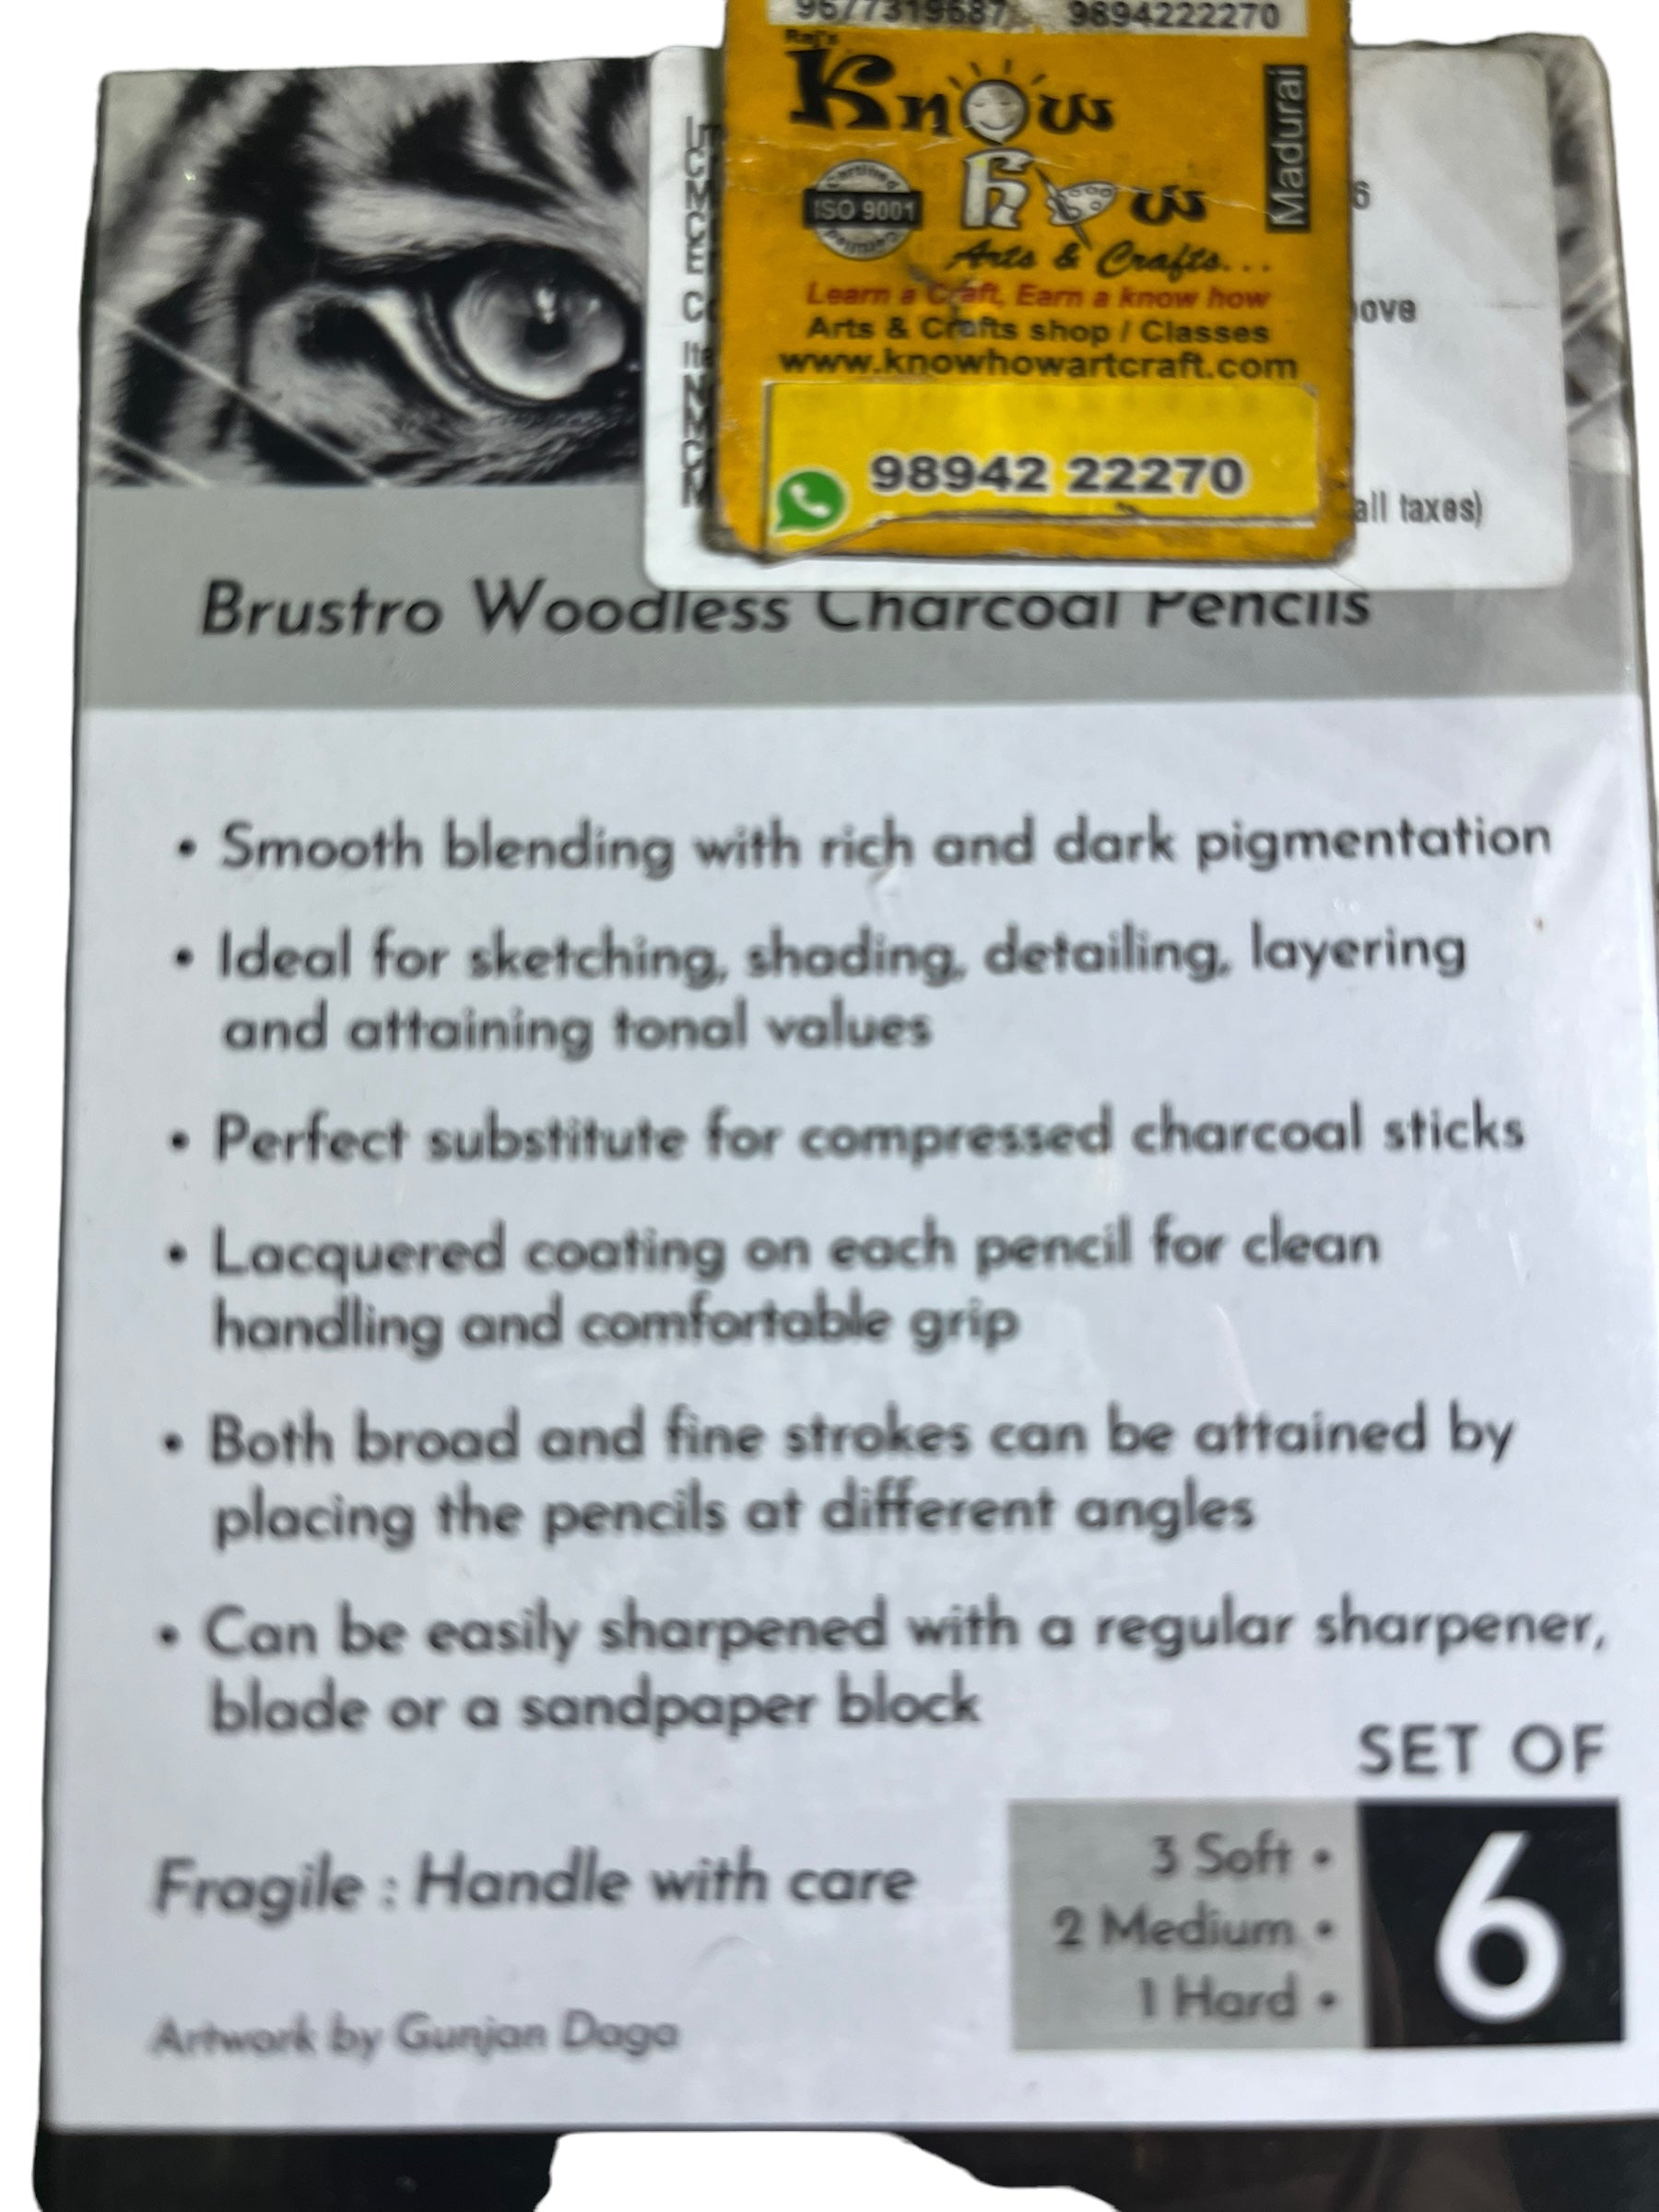 Brustro Woodless Charcoal Pencils - set of 6